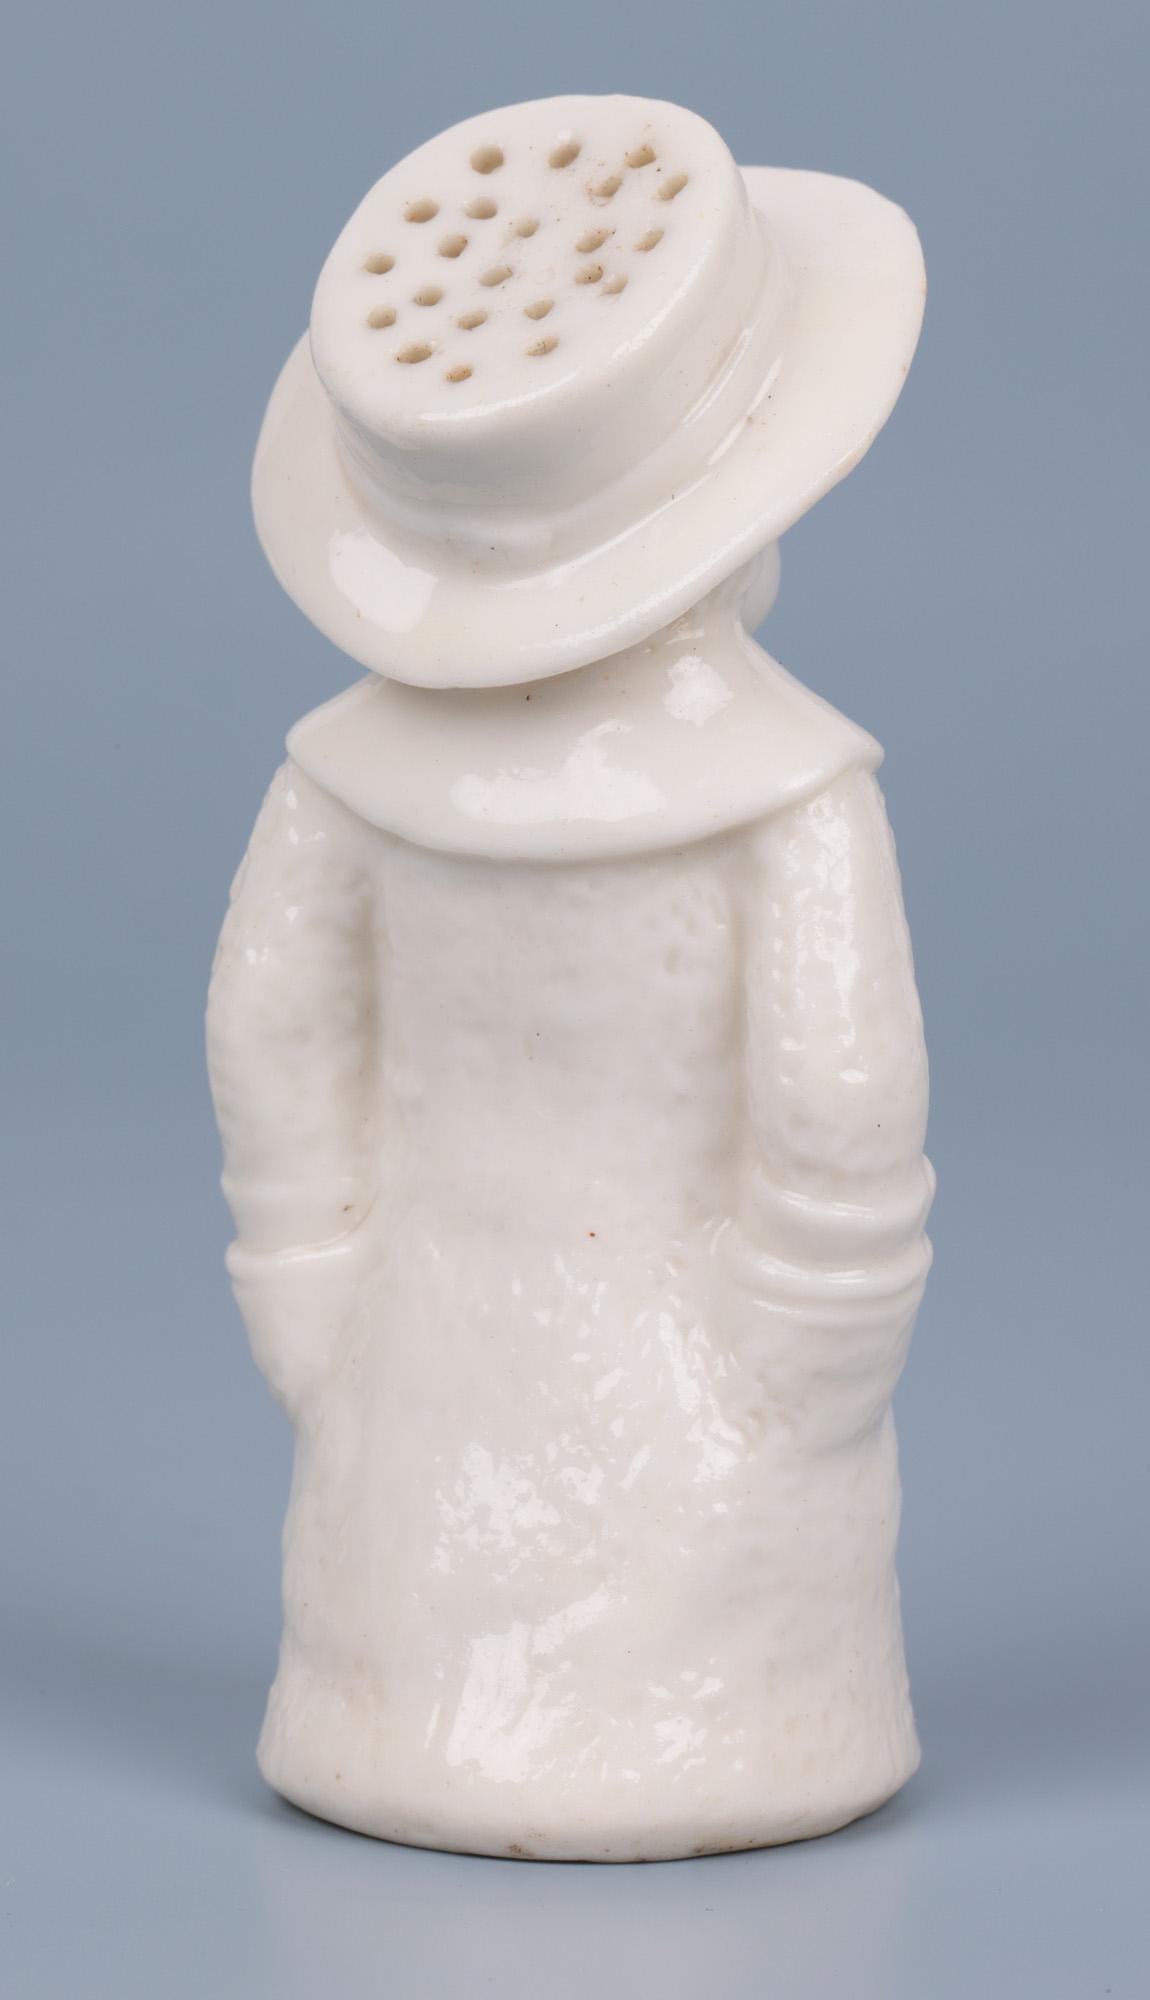 19th Century Antique English Porcelain Boy in Hat Pepper or Pounce Pot For Sale